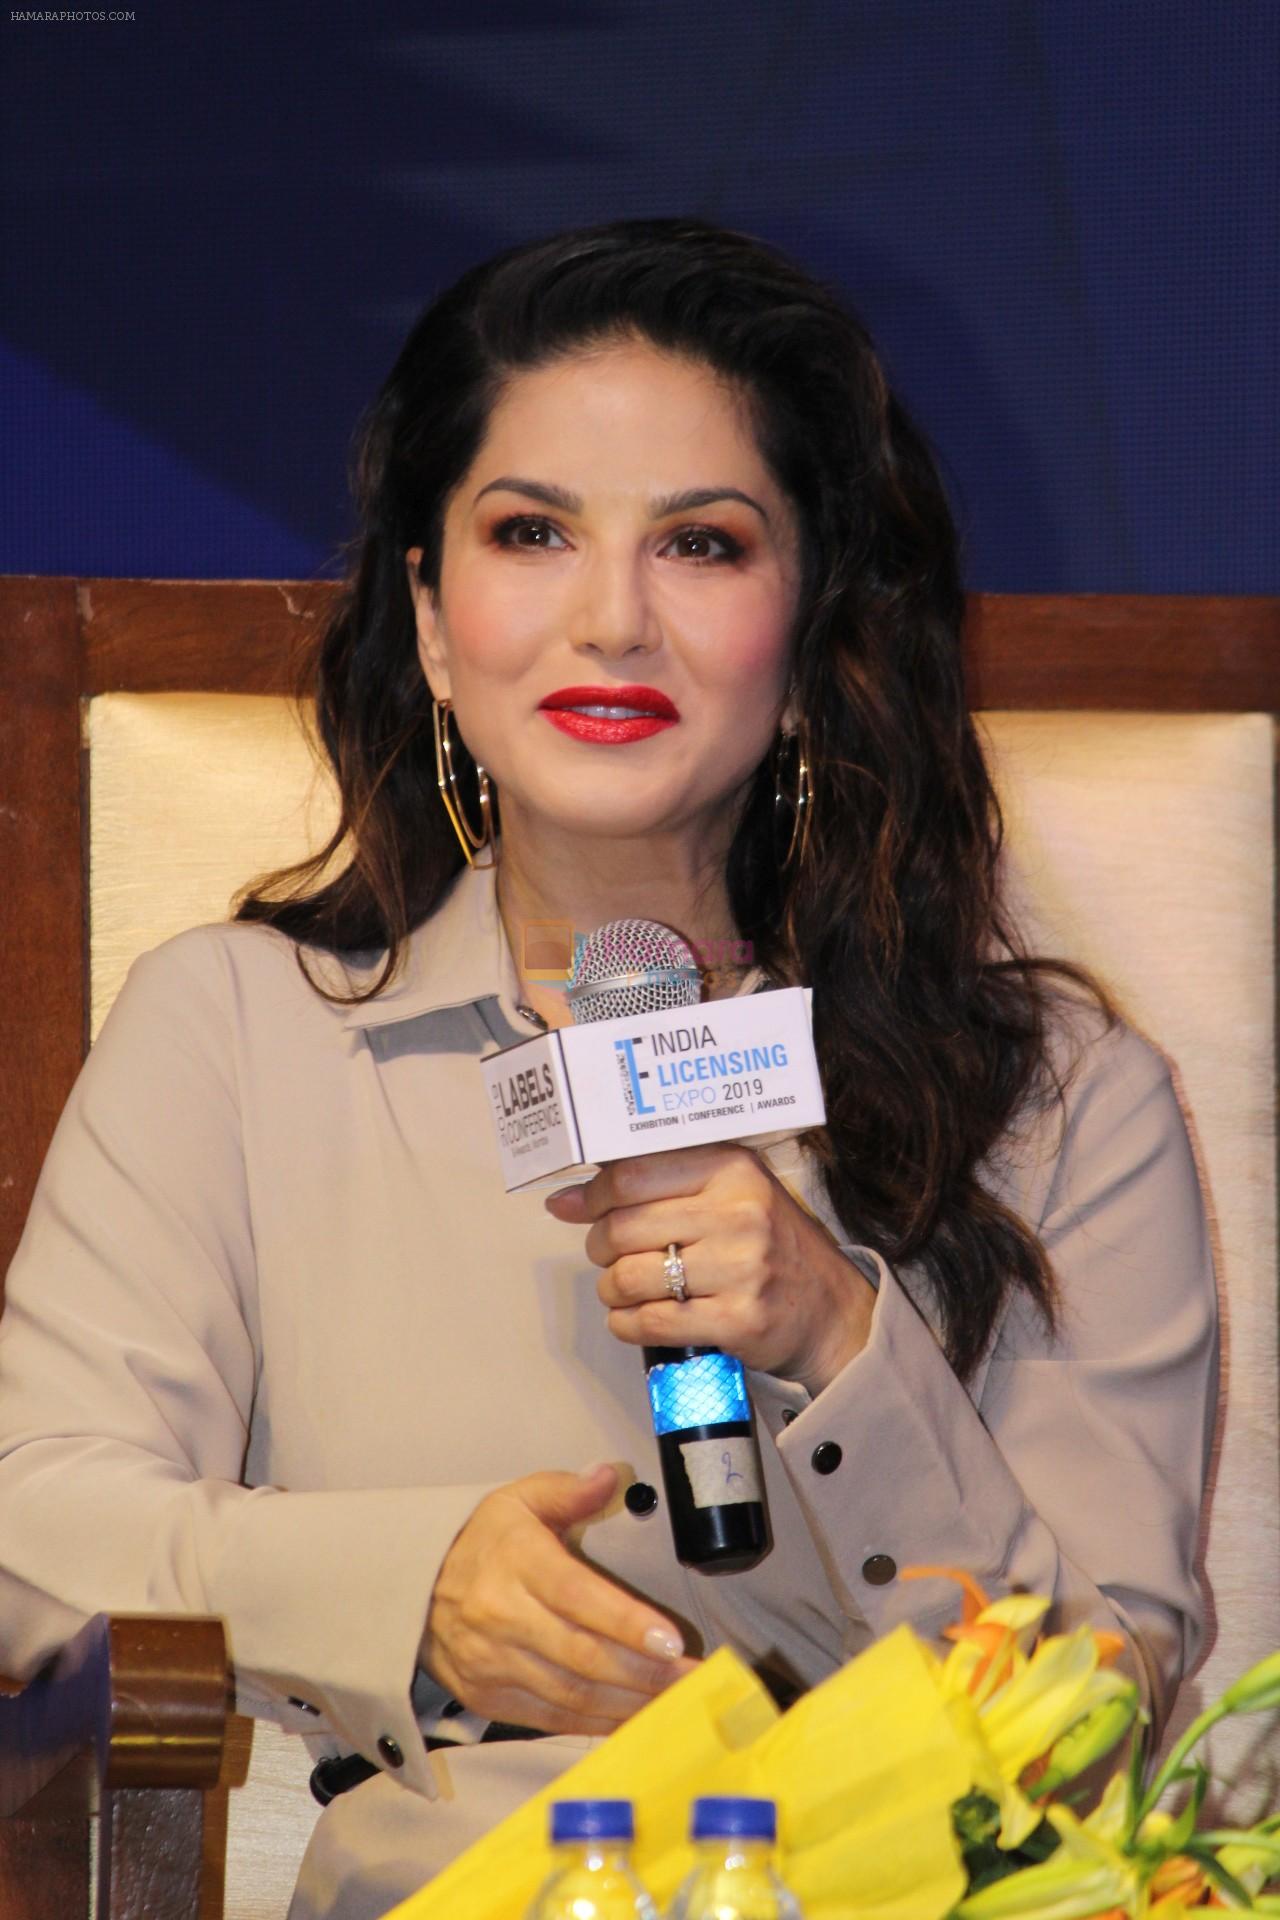 Sunny Leone unveils her fashion brand at India Licensing expo in goregaon on 8th July 2019